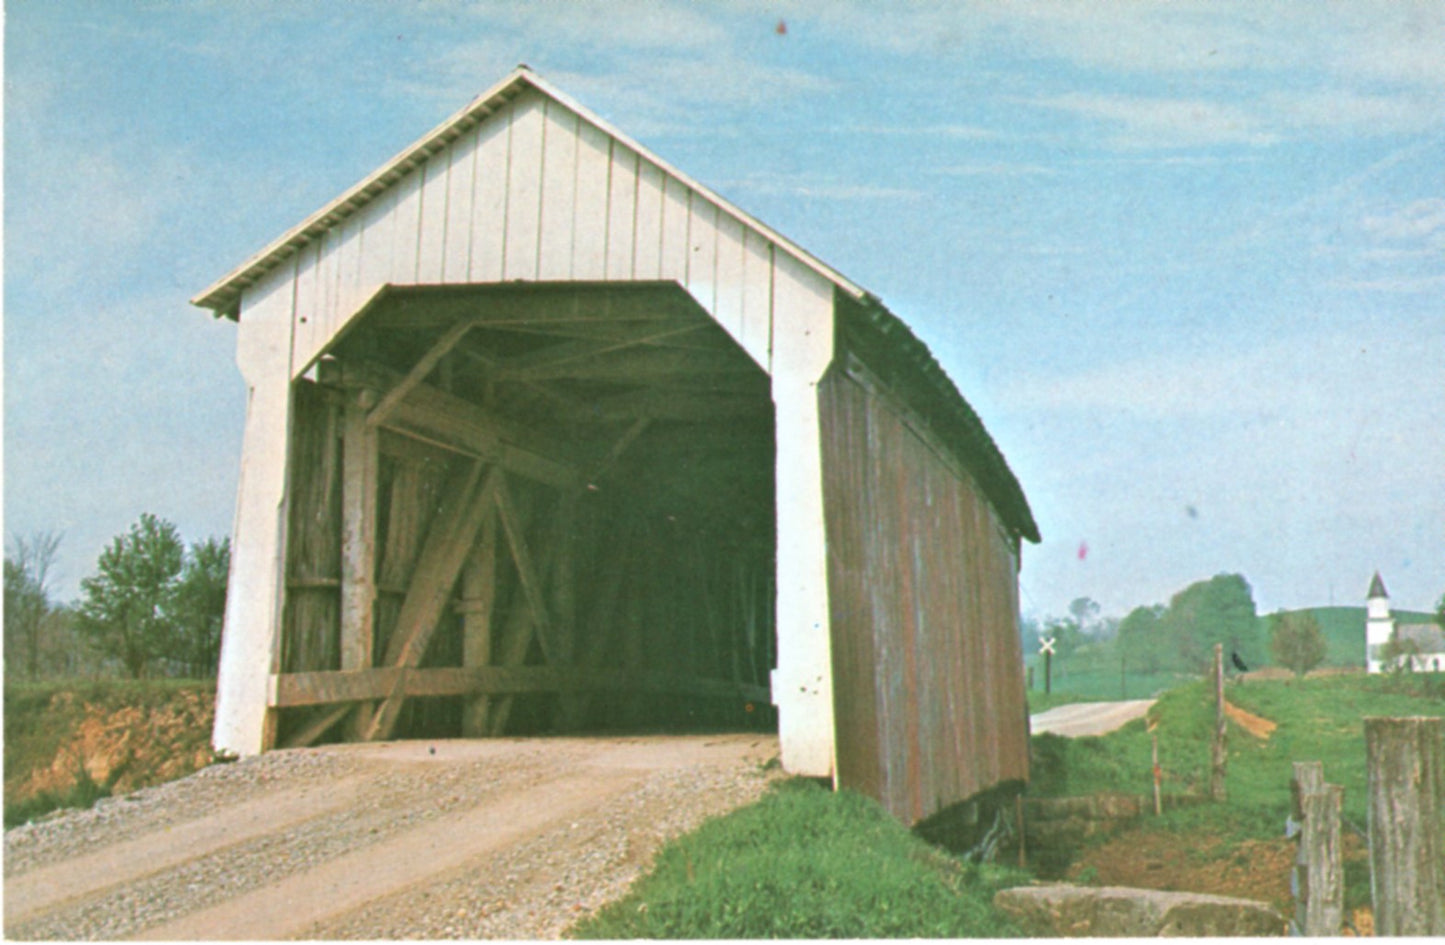 Johnson Creek Perry County #3 Covered Bridge PERRY COUNTY OHIO Vintage Postcard